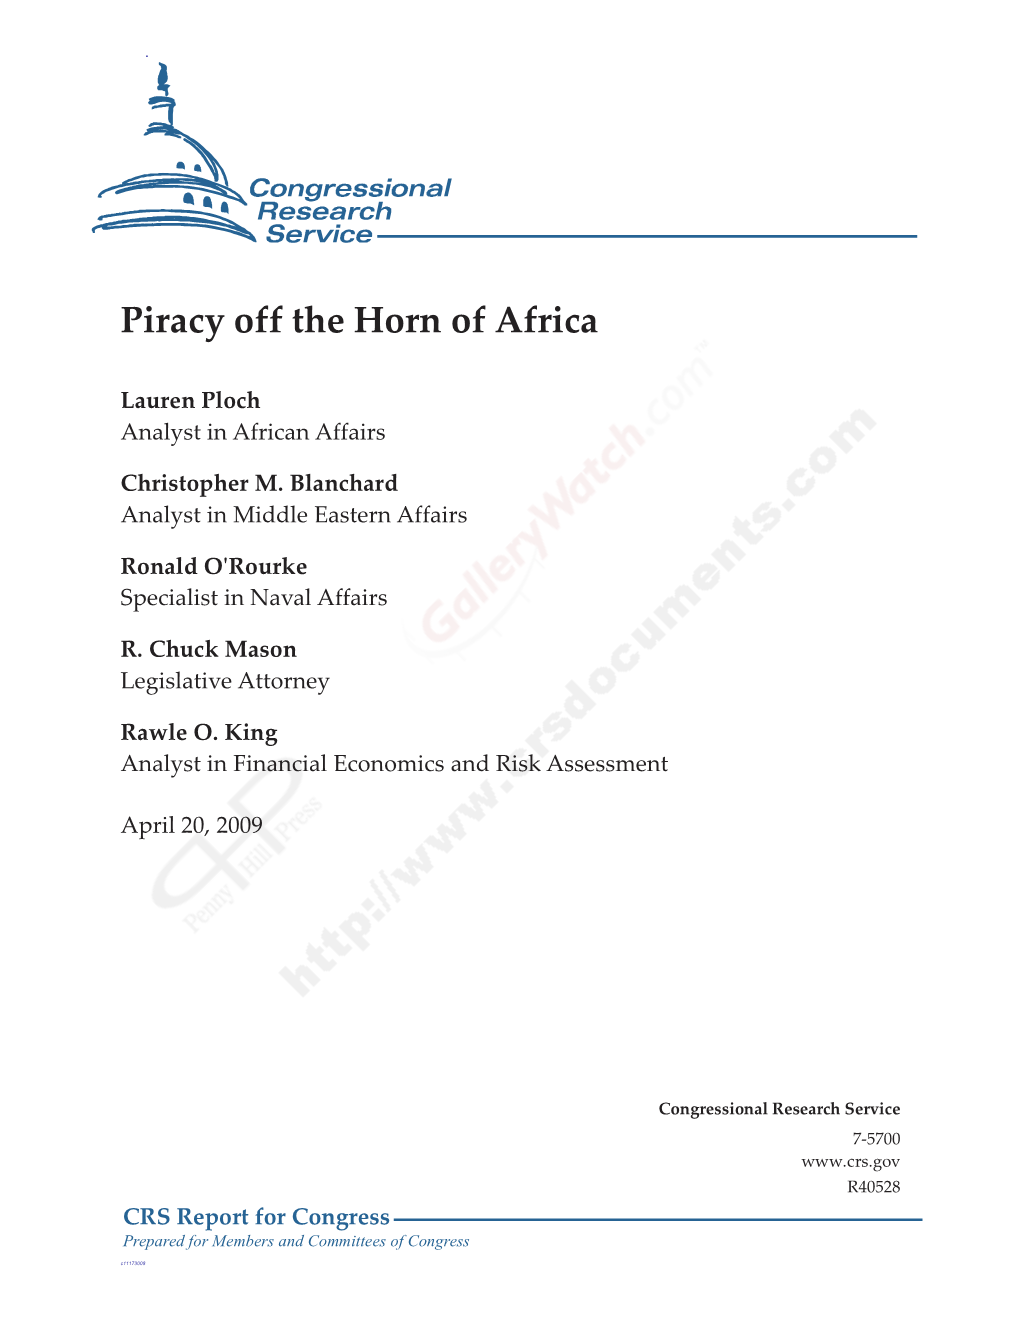 Piracy Off the Horn of Africa